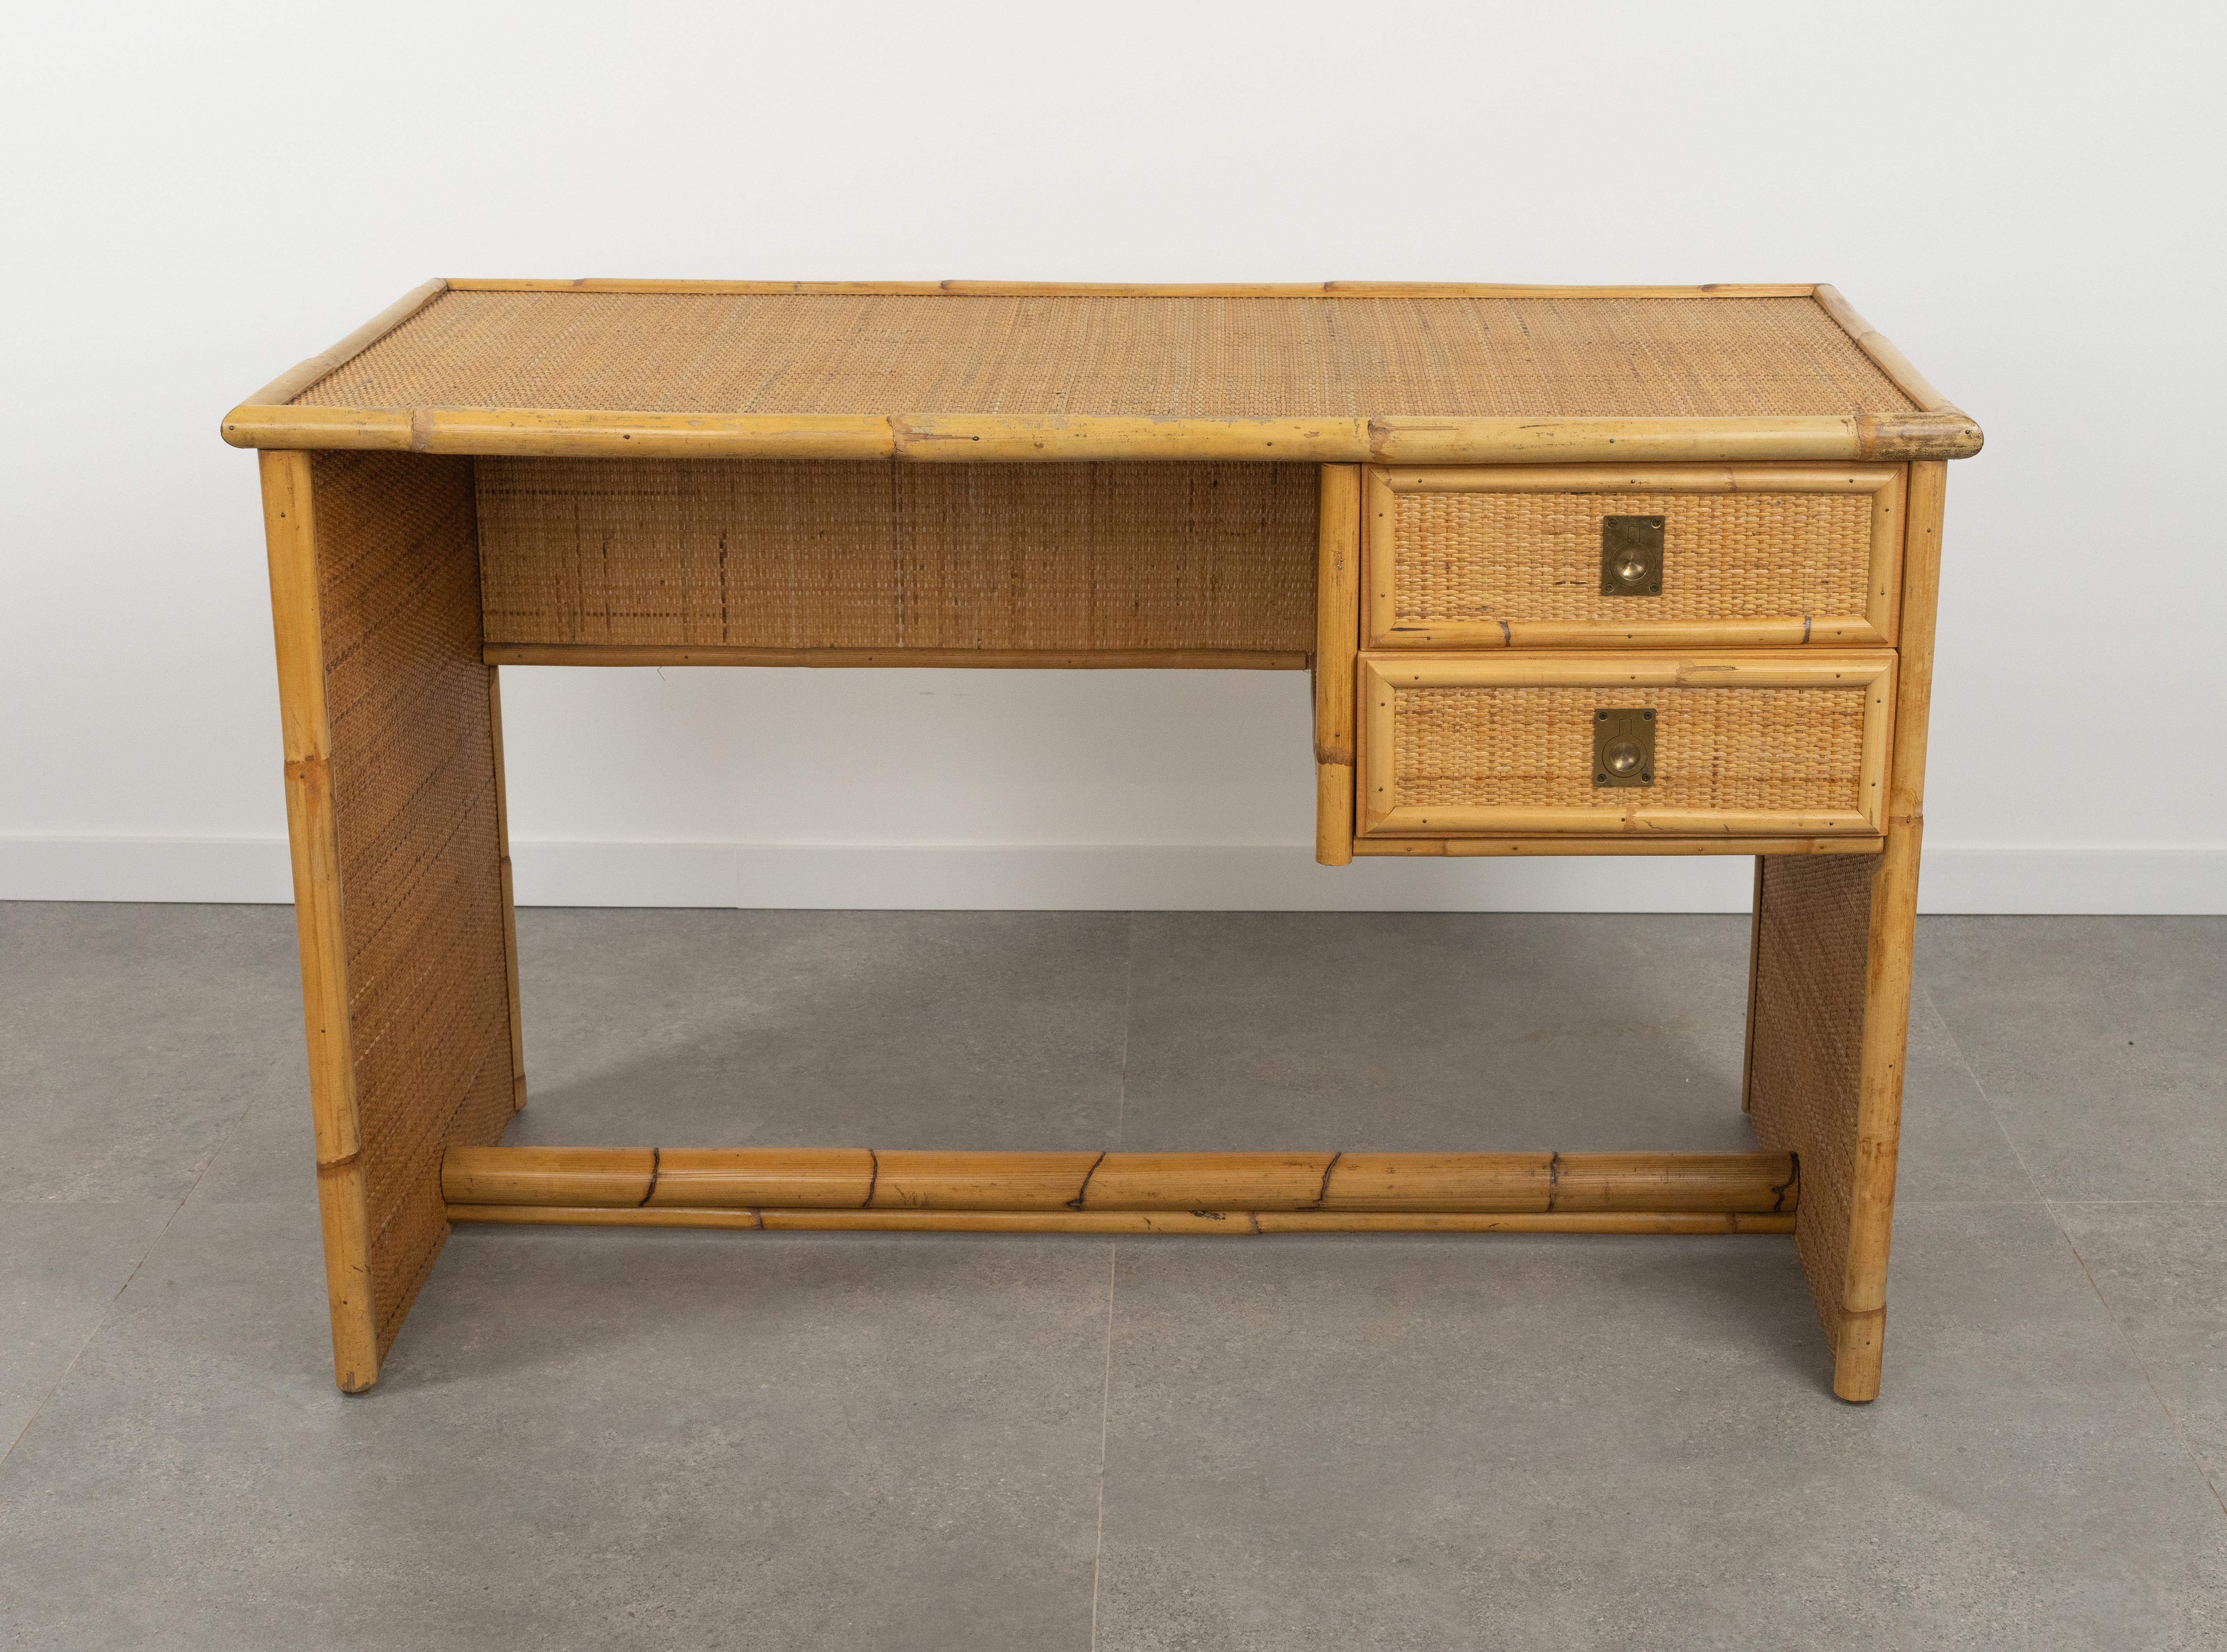 Midcentury Bamboo, Rattan & Wicker Writing Desk Table  by Dal Vera, Italy 1960s For Sale 6